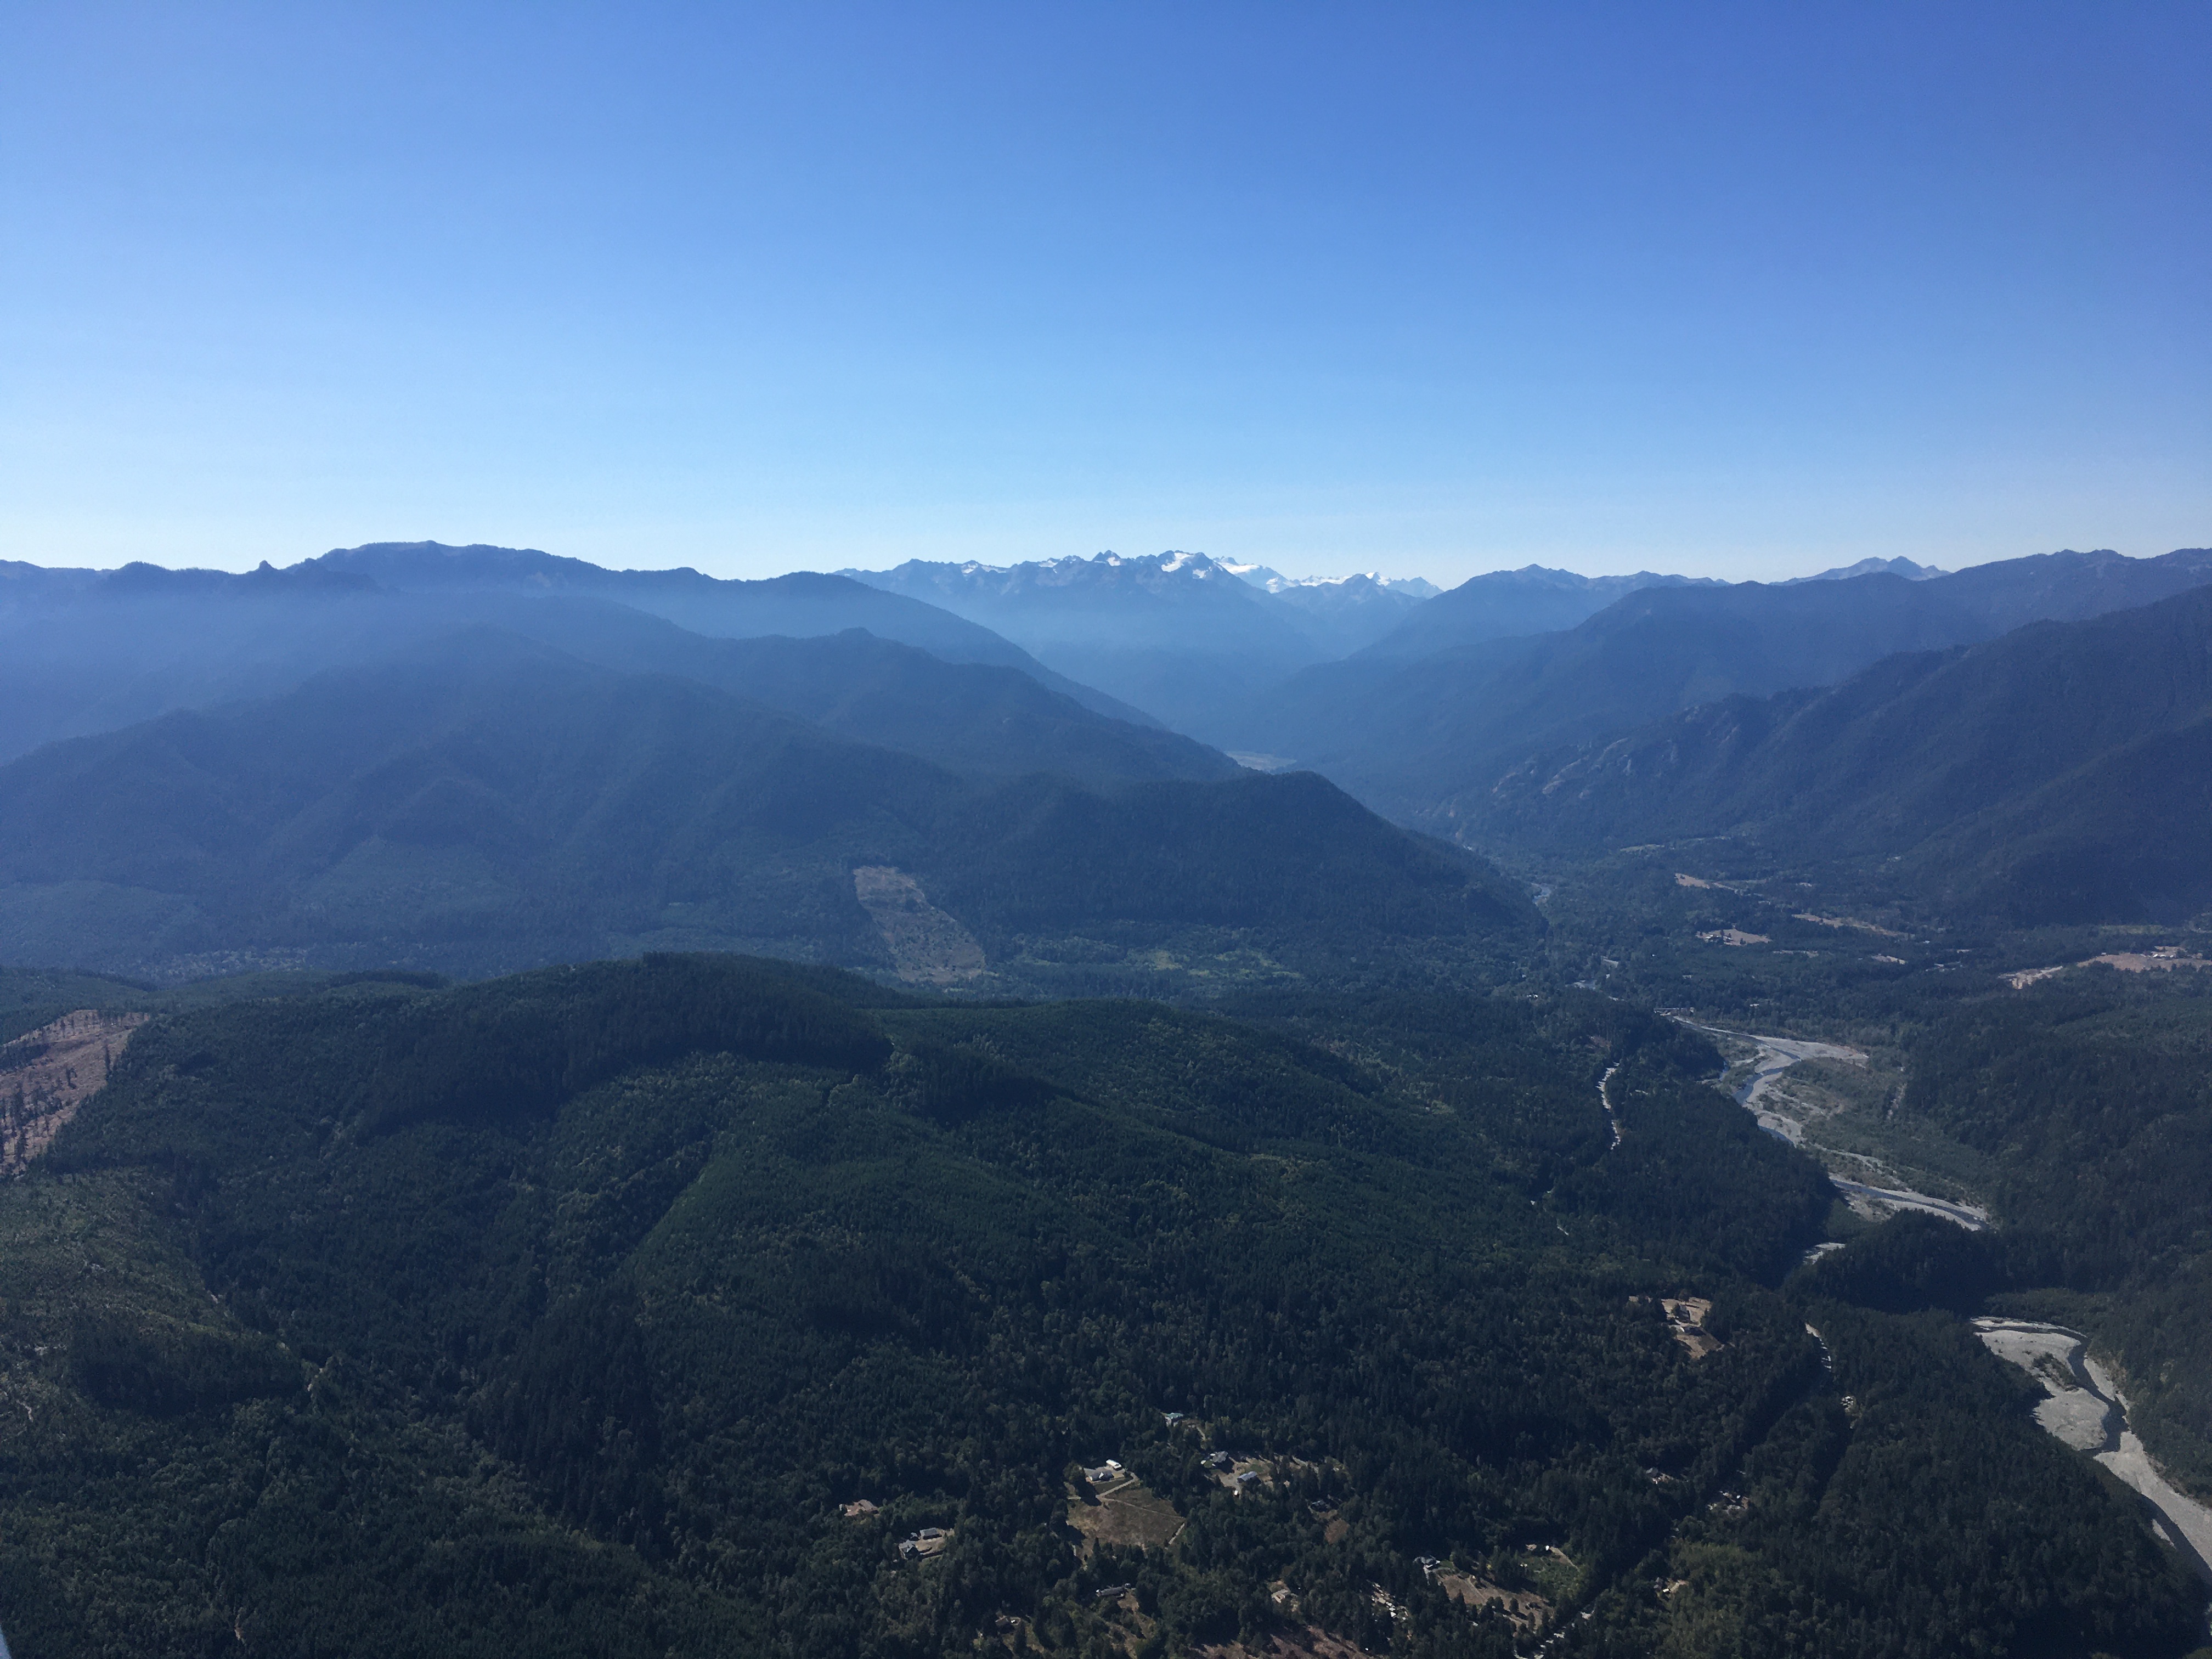 Mountains of the Olympic peninsula. now no longer obscured by cloud, but with some smoky haze